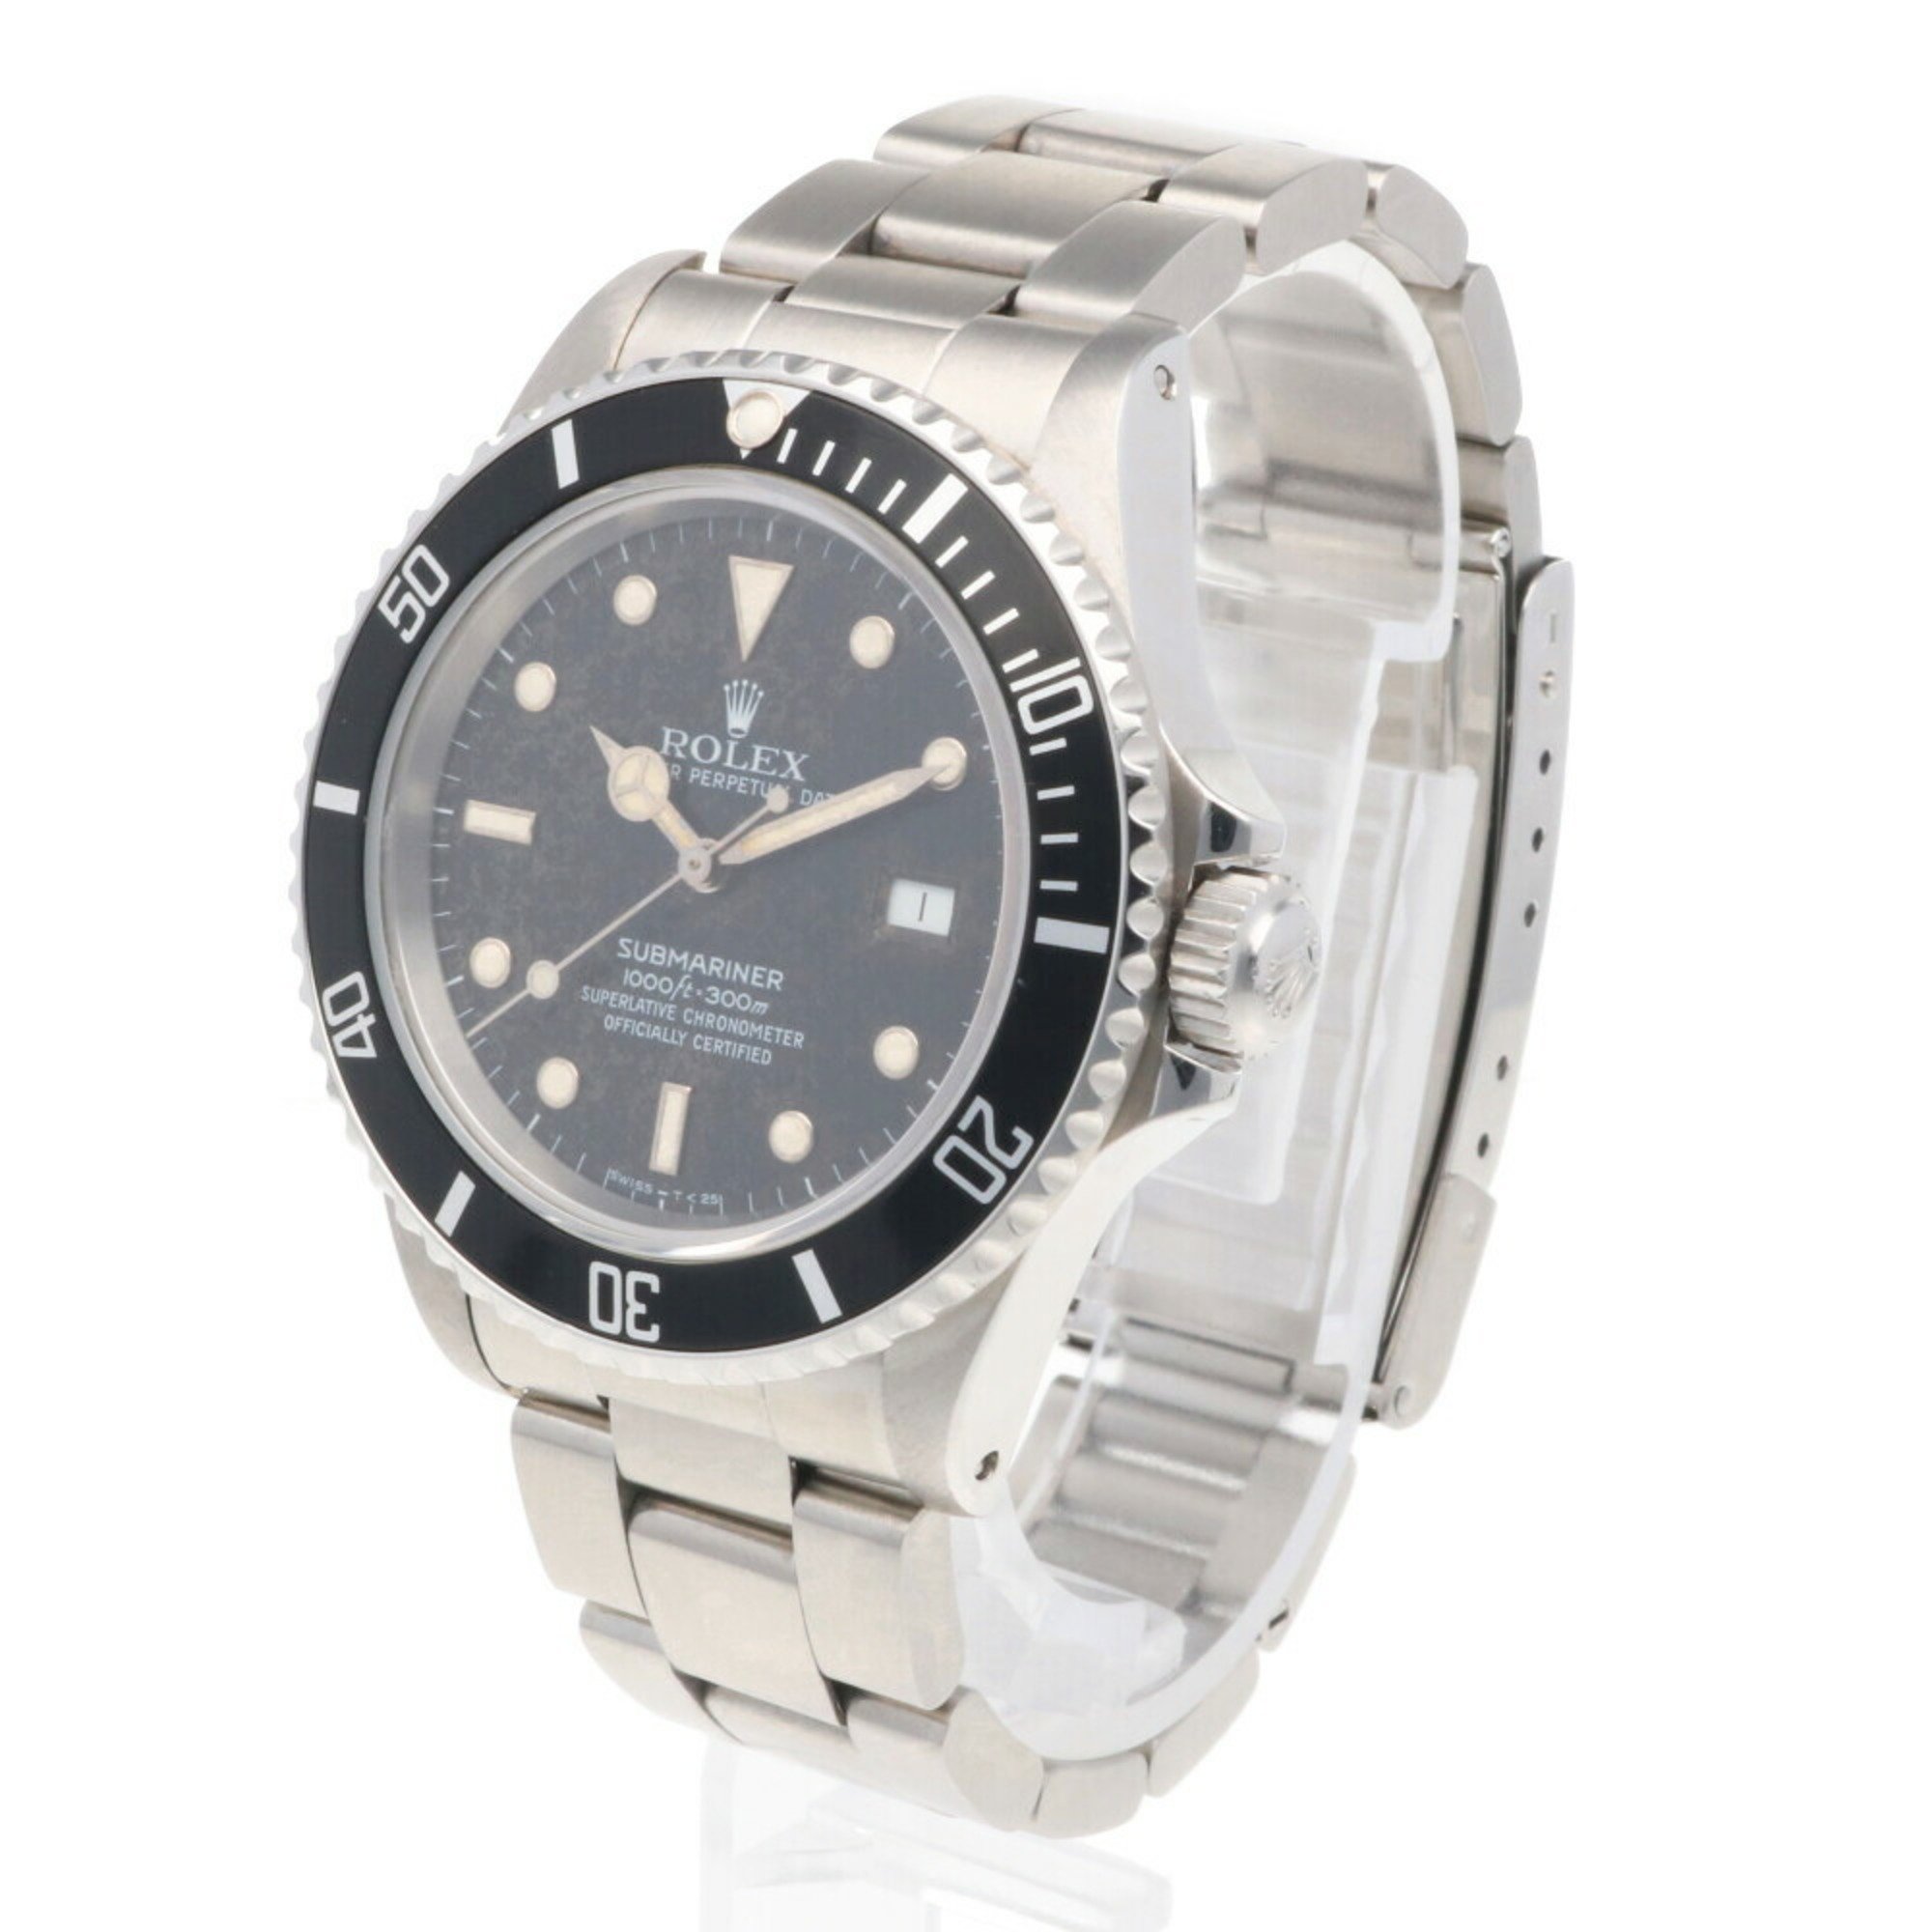 Rolex Submariner Oyster Perpetual Watch Stainless Steel 168000 Automatic Men's ROLEX 98 1987 Triple Zero Overhauled RWA01000000005076